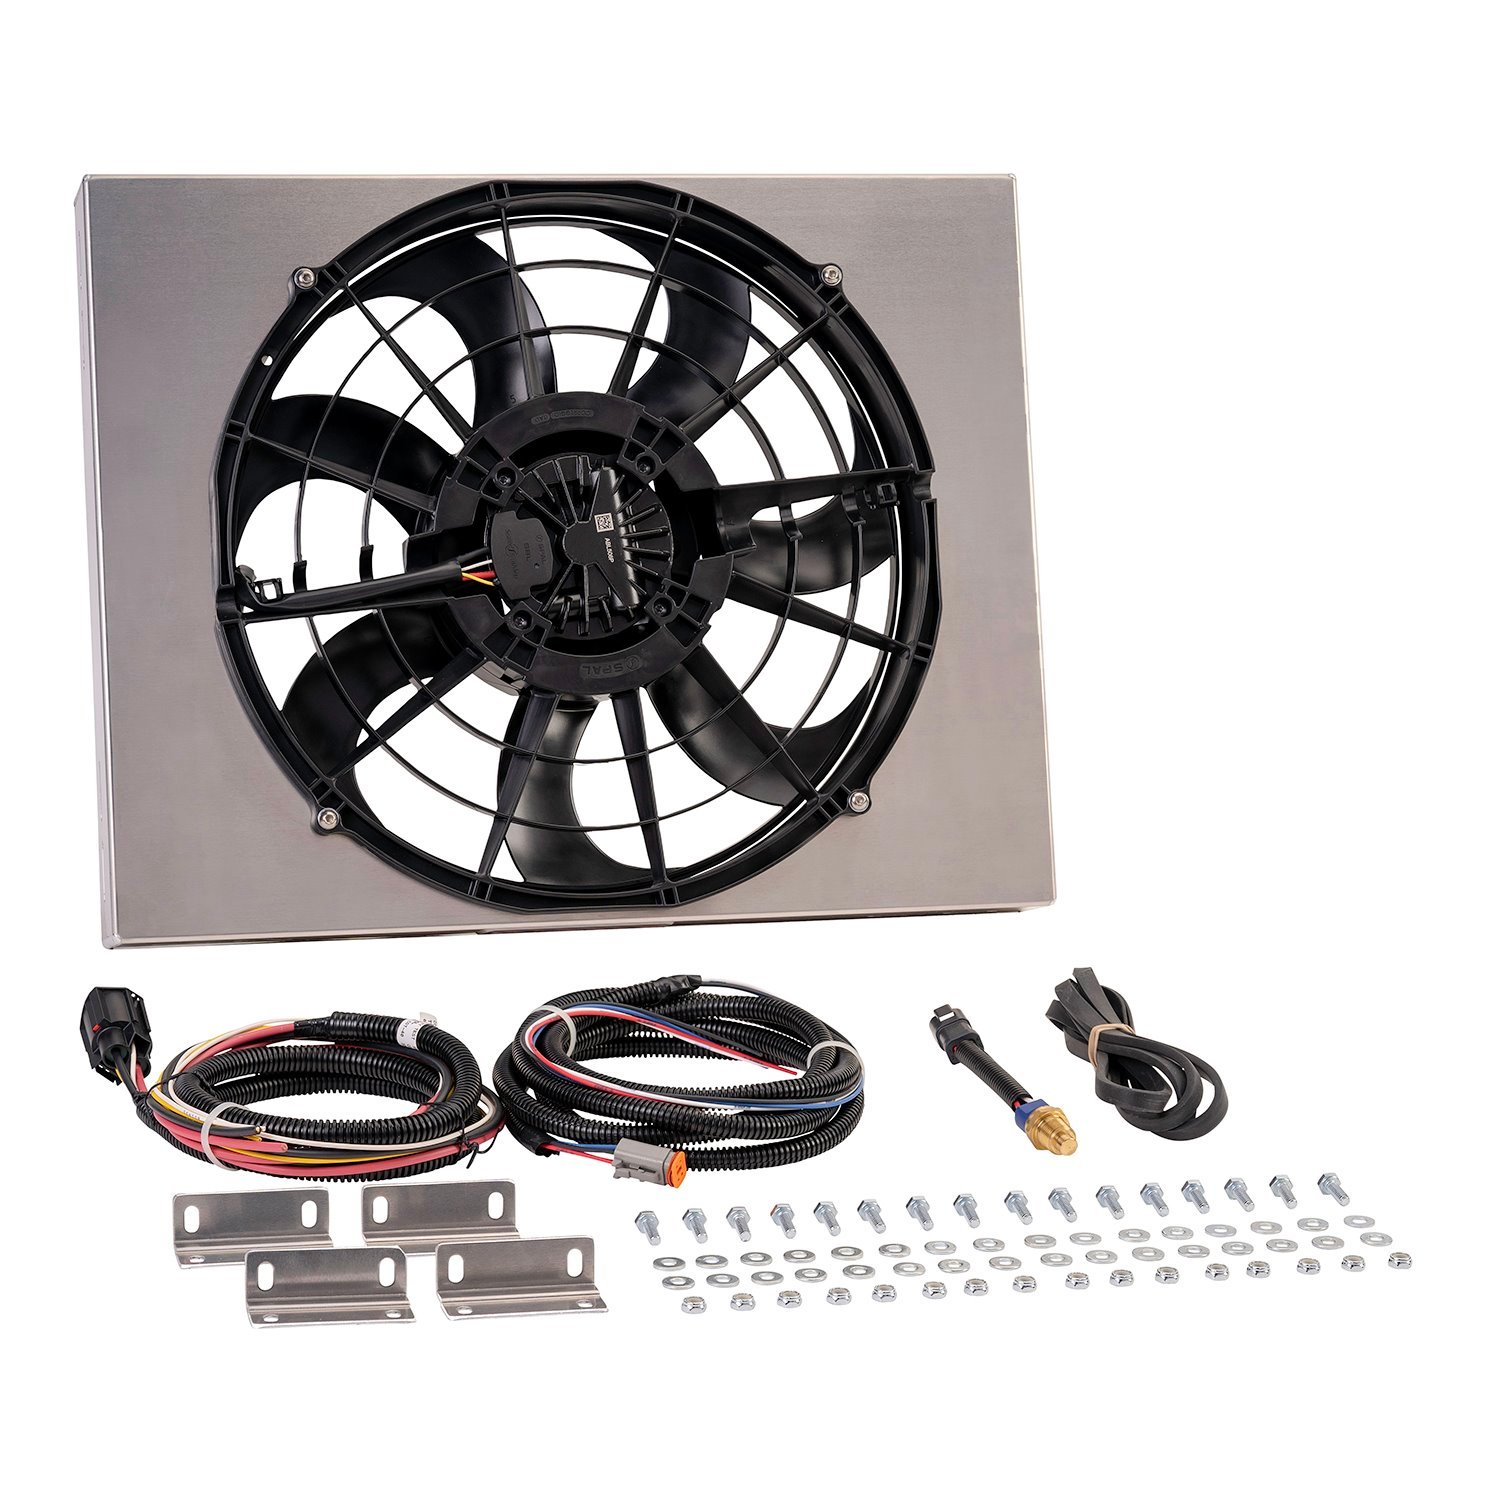 67922-185 Brushless Single Powerpack 17 in. Radiator Fan Assembly with Integrated 185 Degree PWM Controller